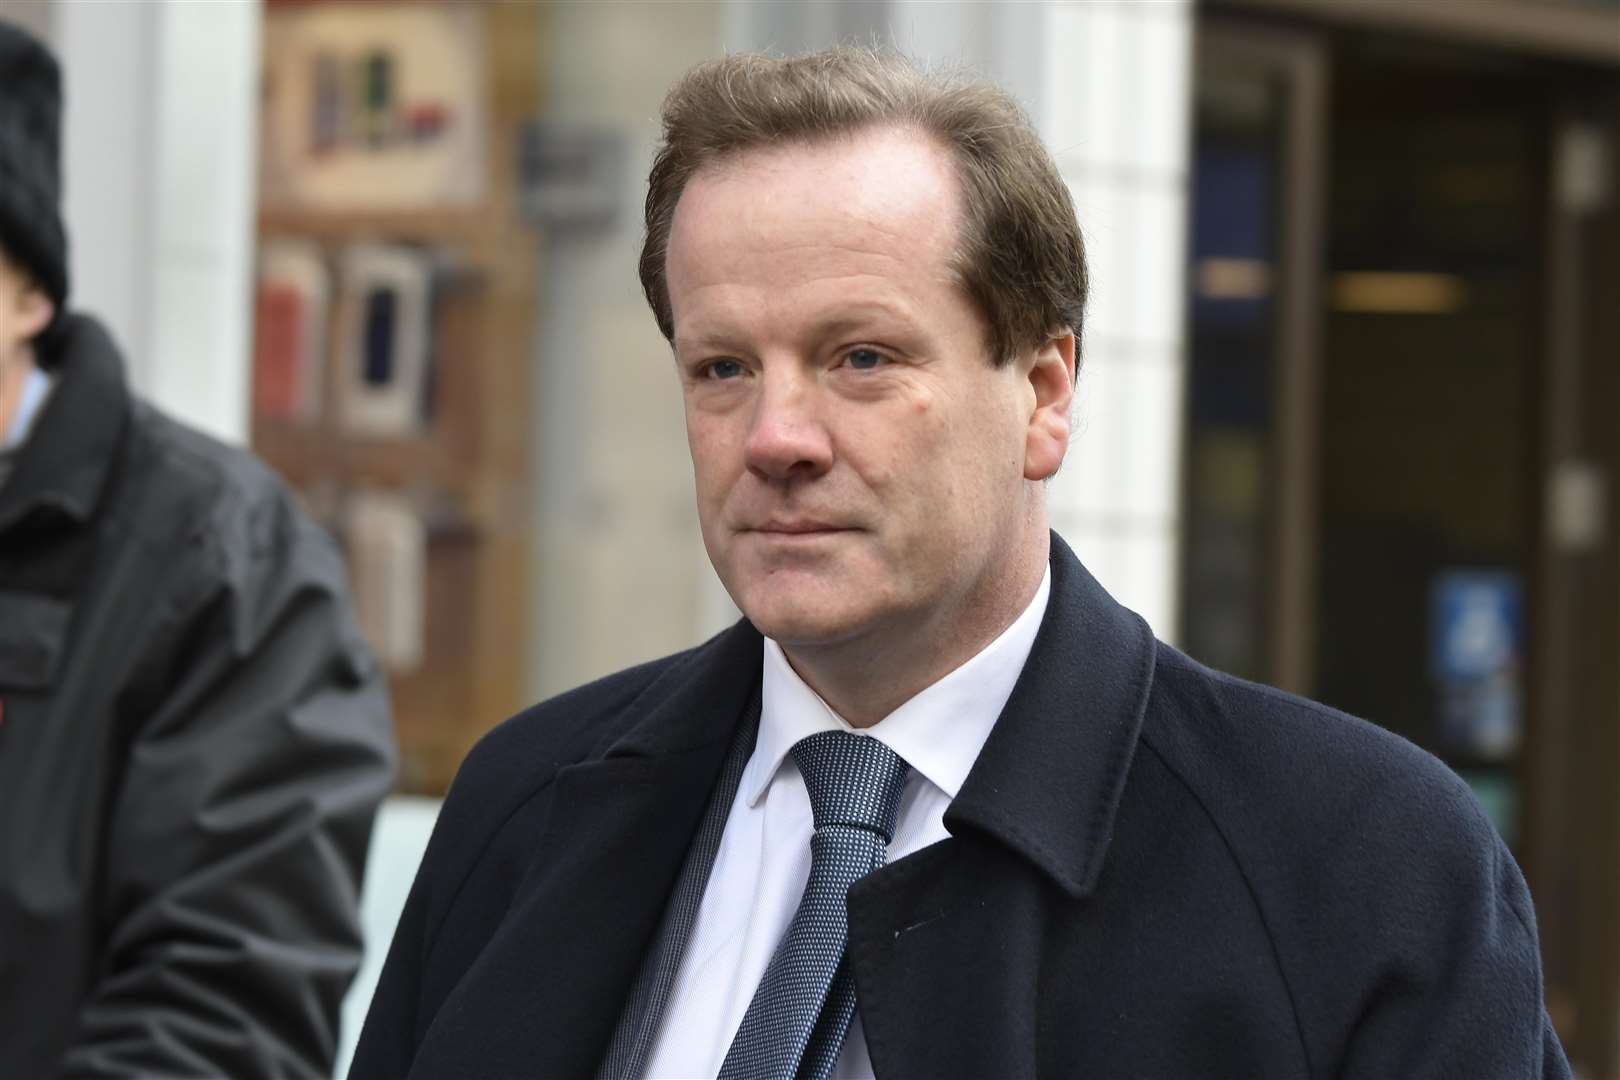 Dover and Deal MP Charlie Elphicke